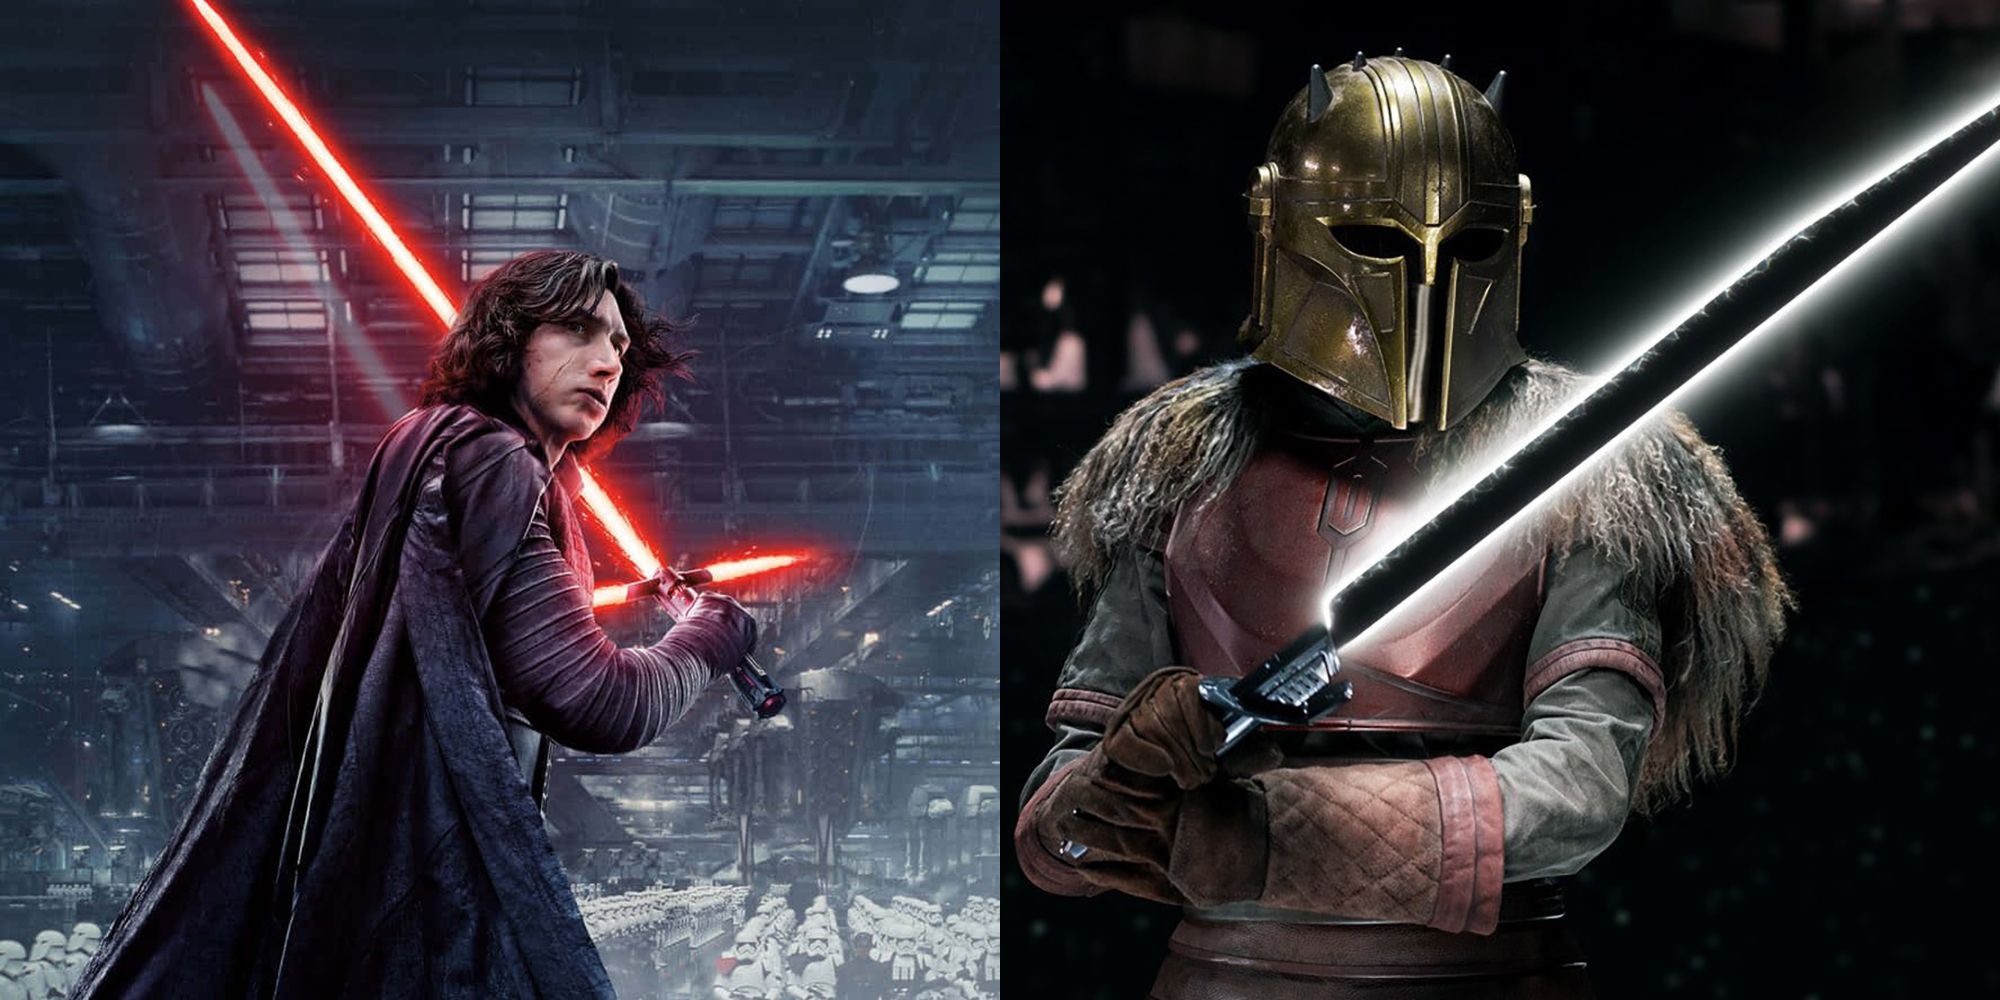 Star Wars Most Unusual Lightsaber Designs (Kylo Ren and The Armorer)